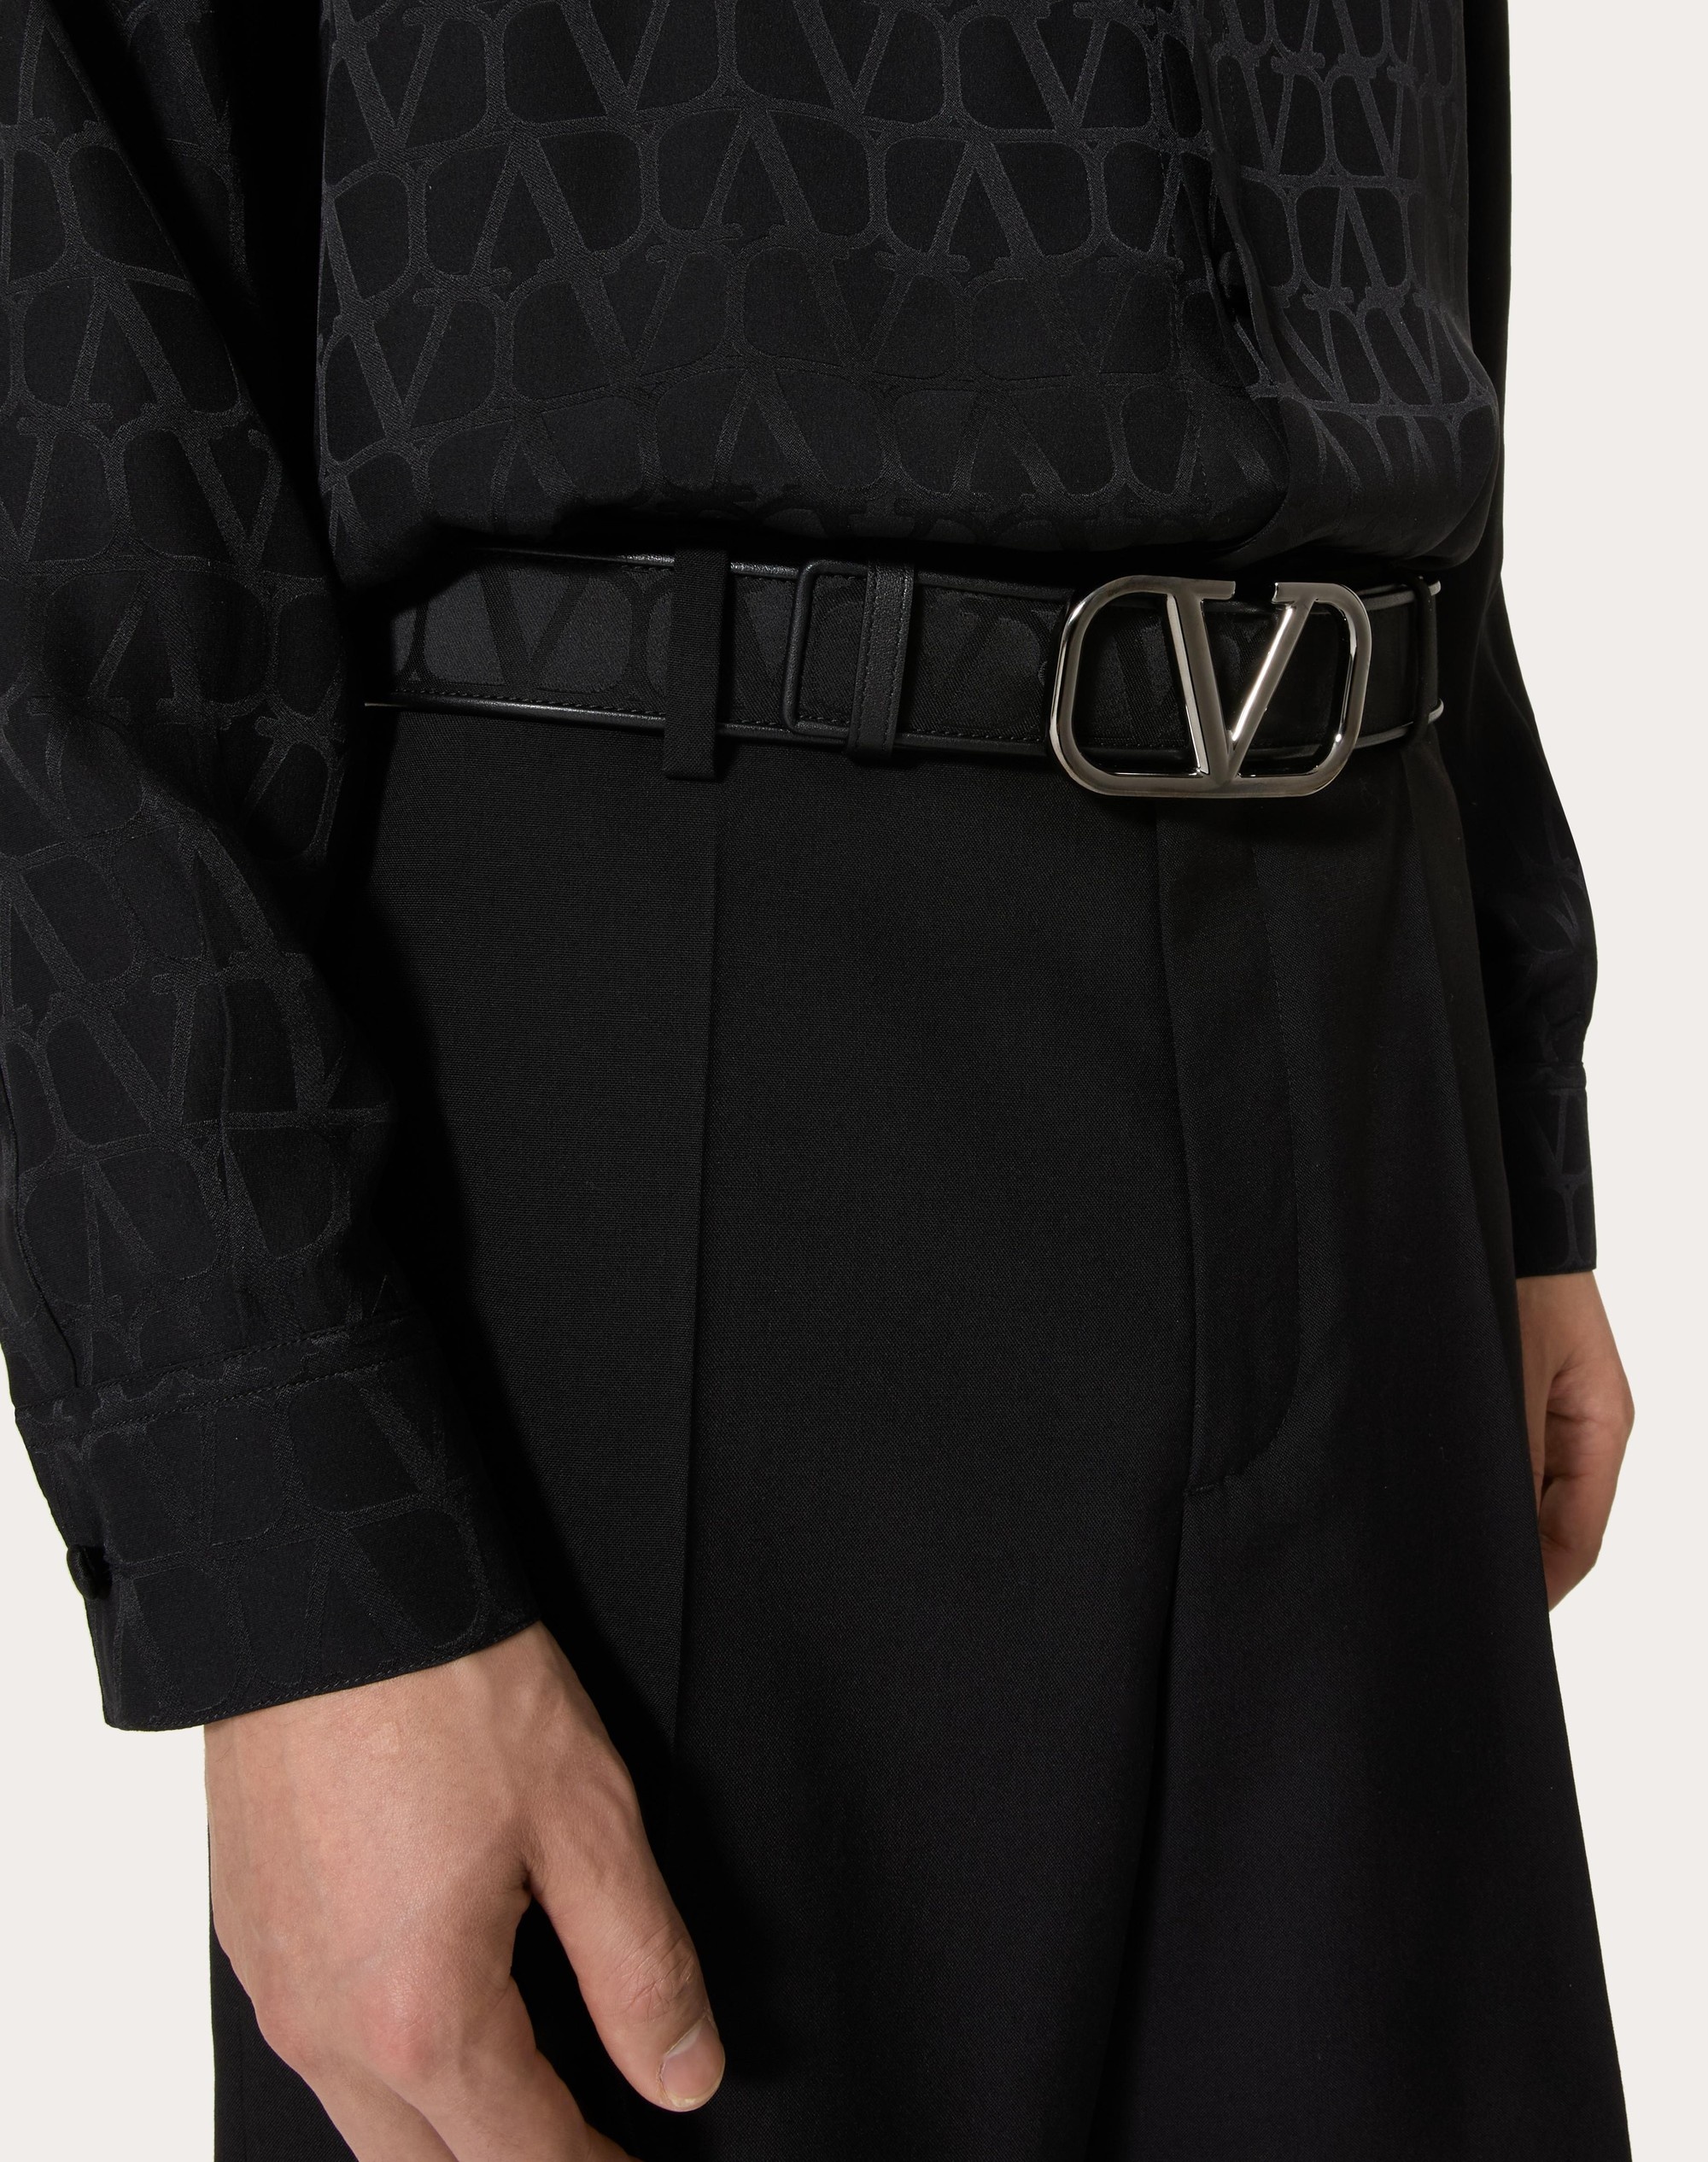 TOILE ICONOGRAPHE BELT IN TECHNICAL FABRIC WITH LEATHER DETAILS - 5